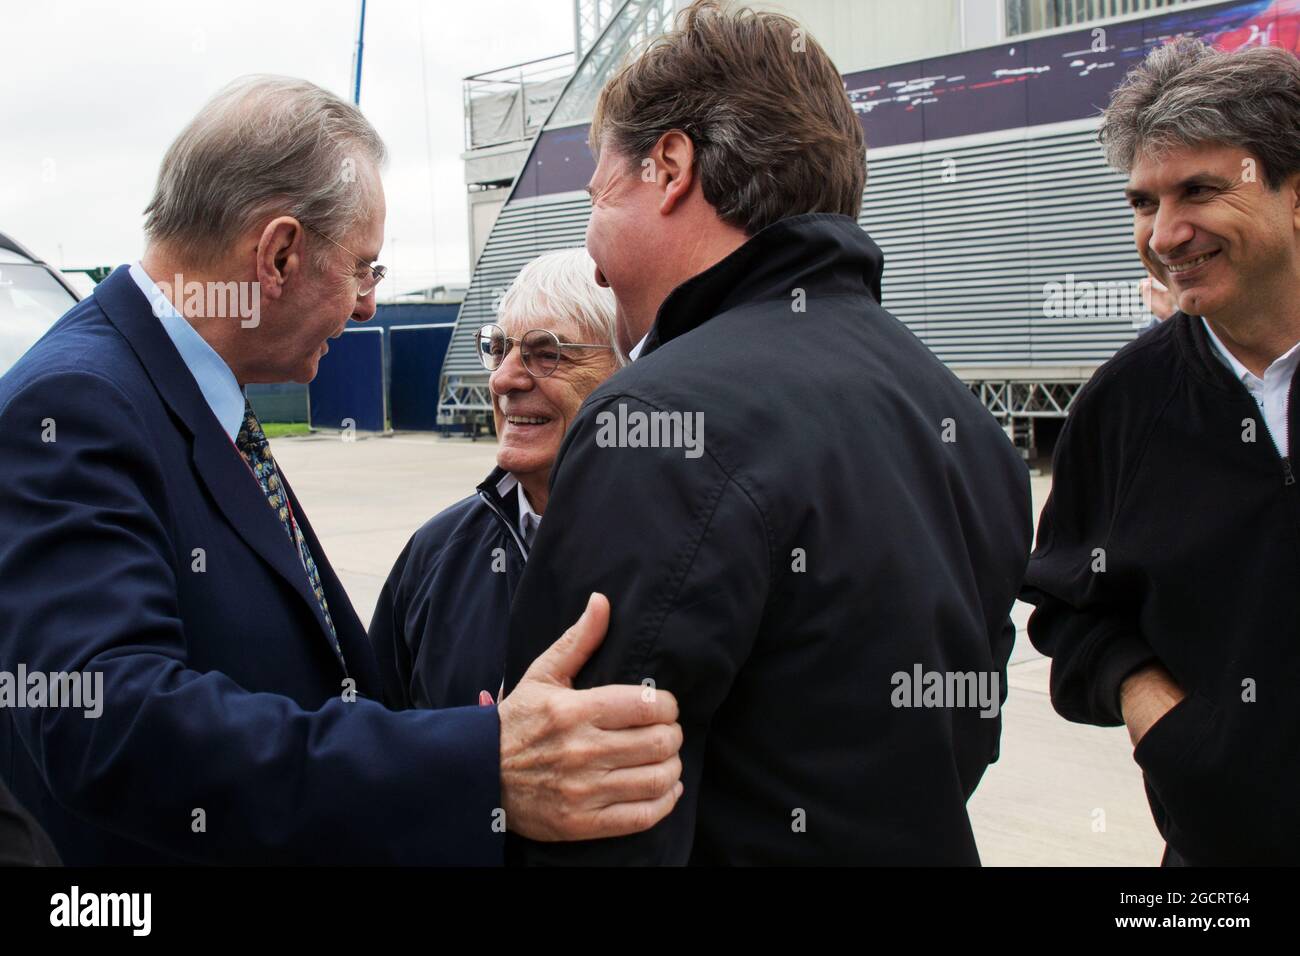 Jacques Rogge (FRA) IOC President with Bernie Ecclestone (GBR) CEO Formula One Group (FOM). British Grand Prix, Sunday 8th July 2012. Silverstone, England. Stock Photo